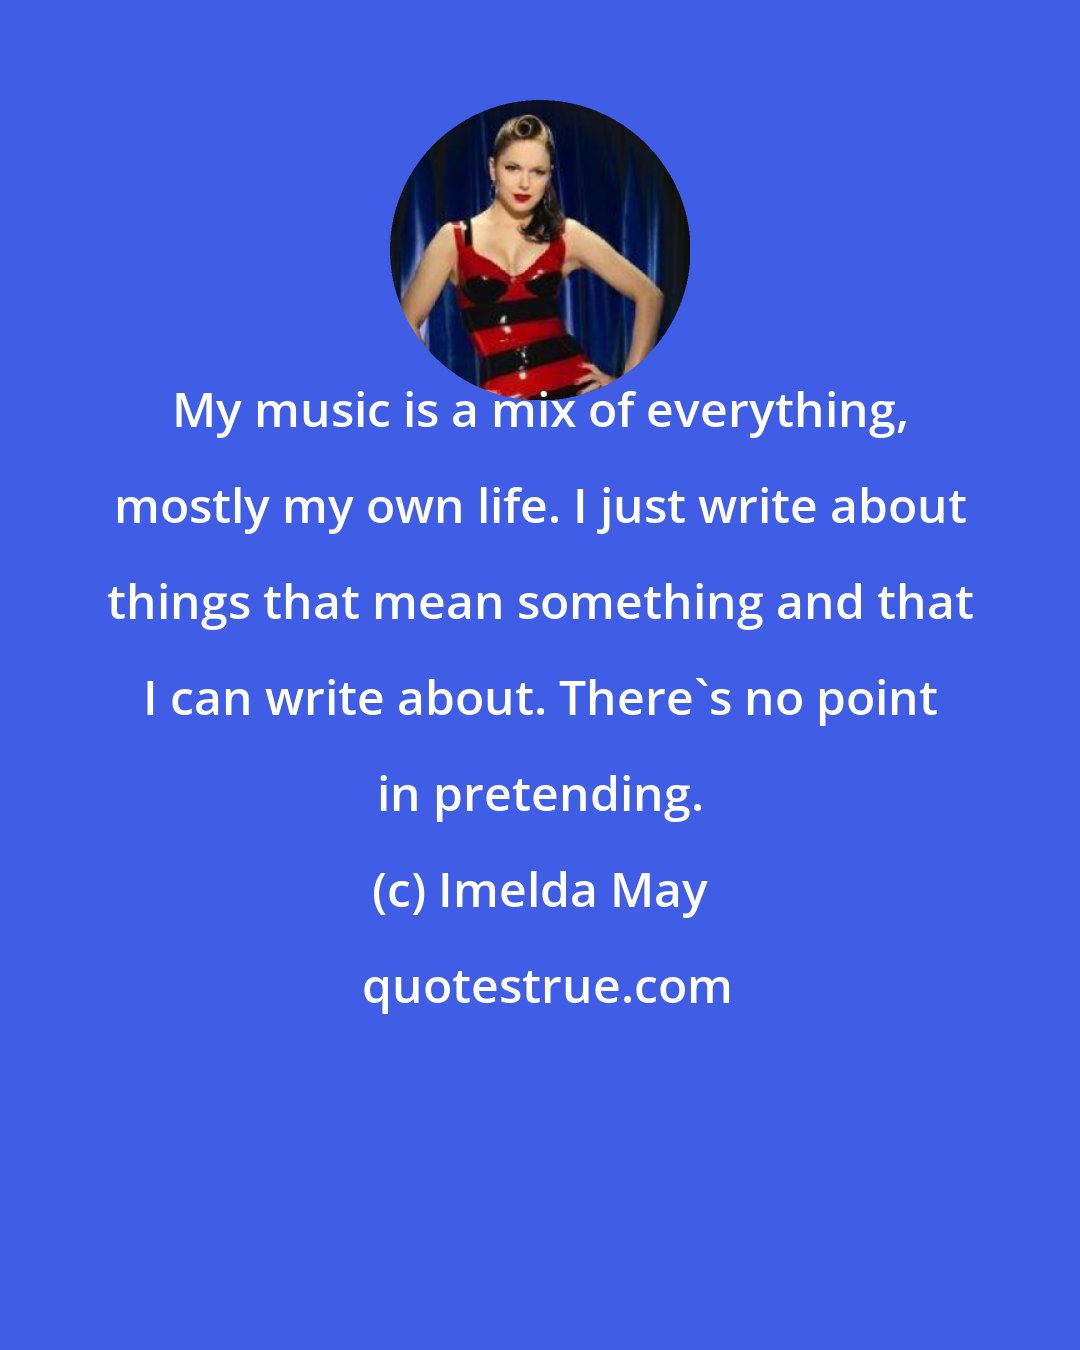 Imelda May: My music is a mix of everything, mostly my own life. I just write about things that mean something and that I can write about. There's no point in pretending.